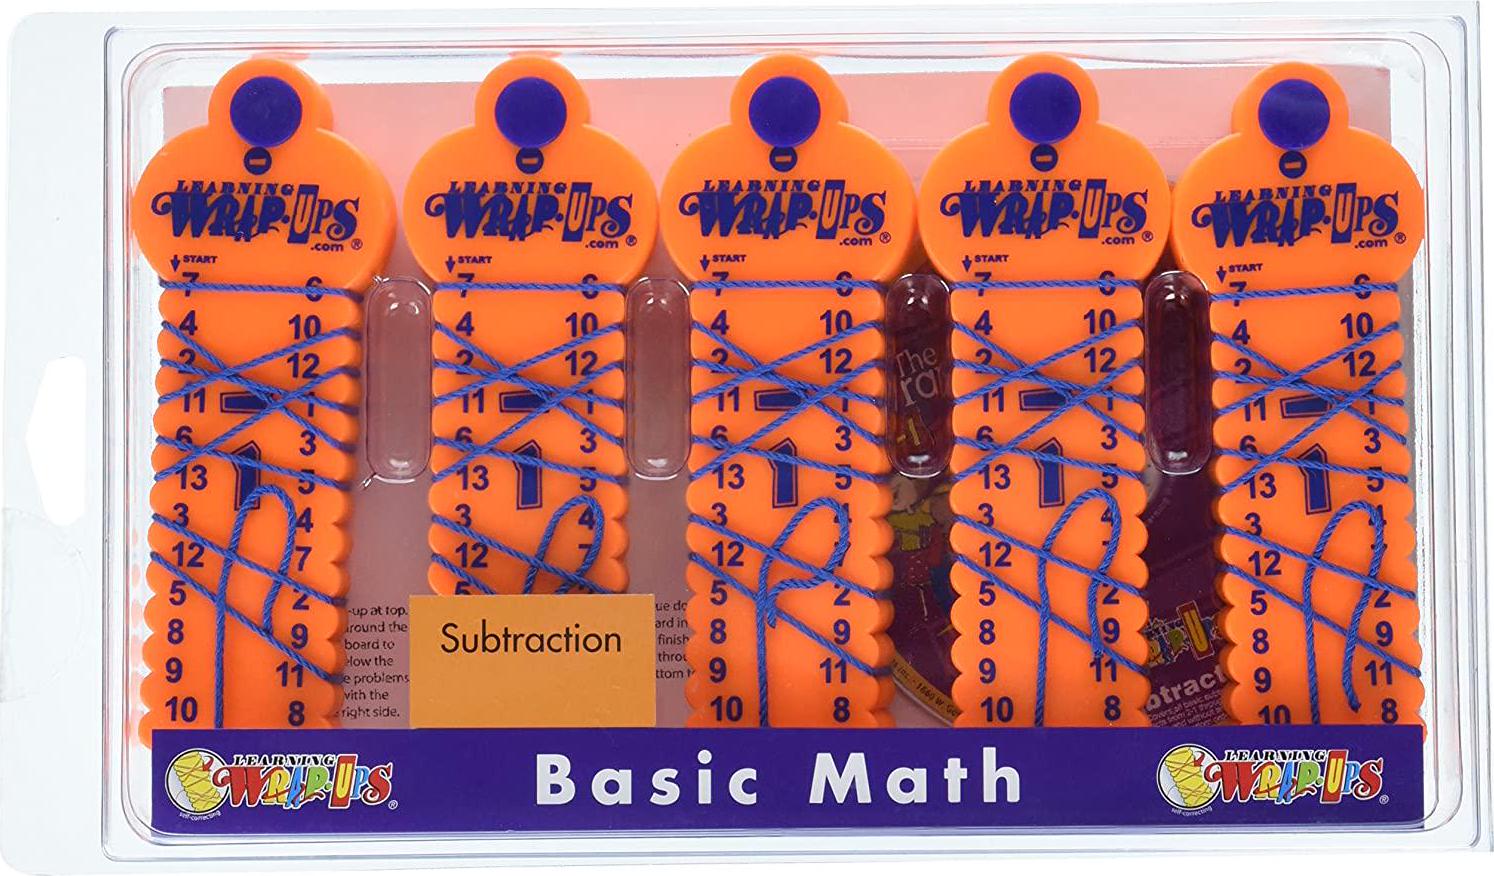 Learning Wrap-Ups, LEARNING WRAP-UPS SELF-CORRECTING Subtraction Center Kit with CD